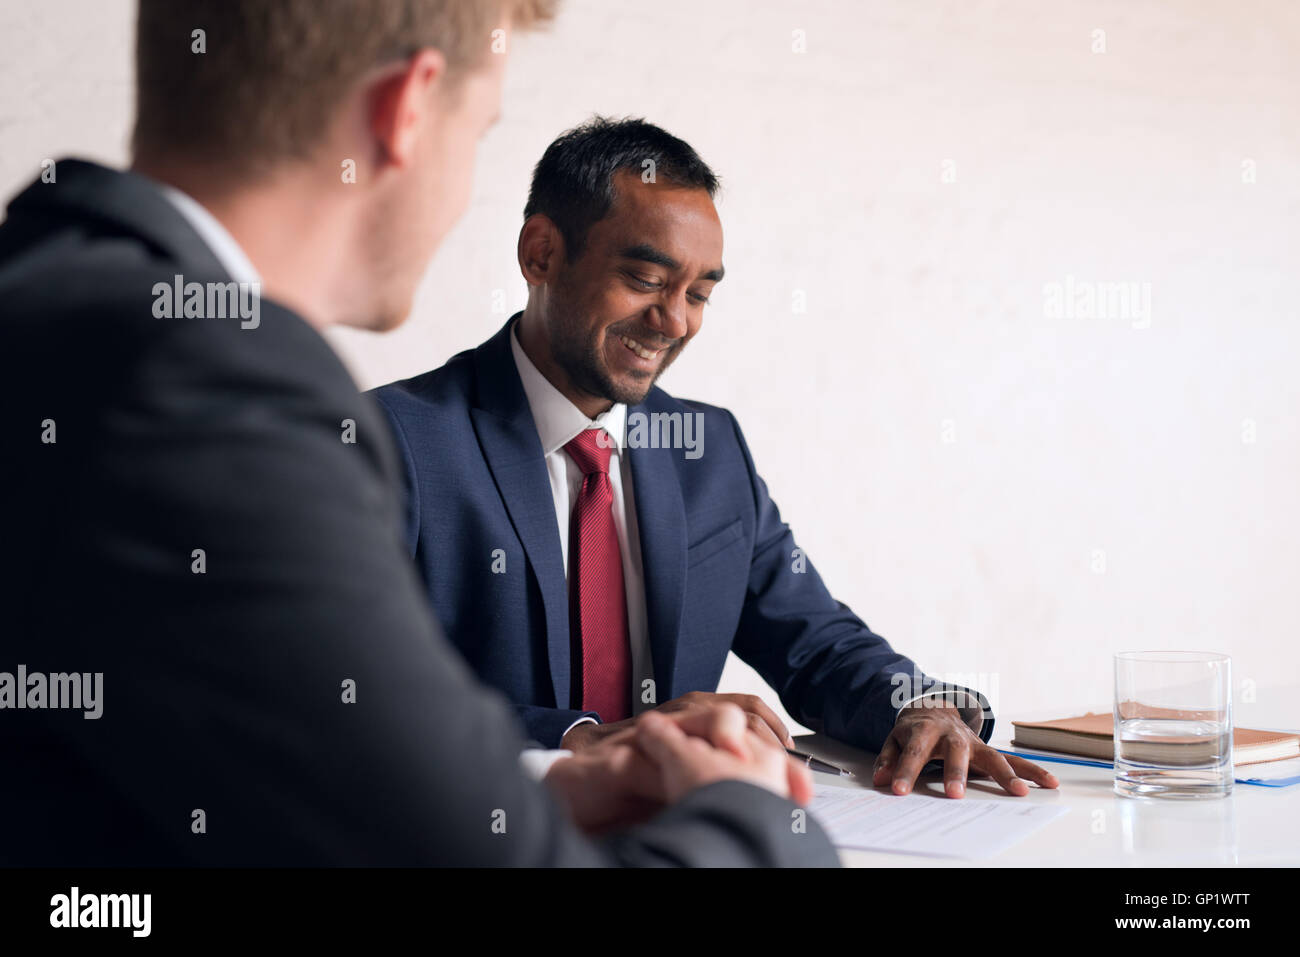 Corporate negotiations are going very well Stock Photo